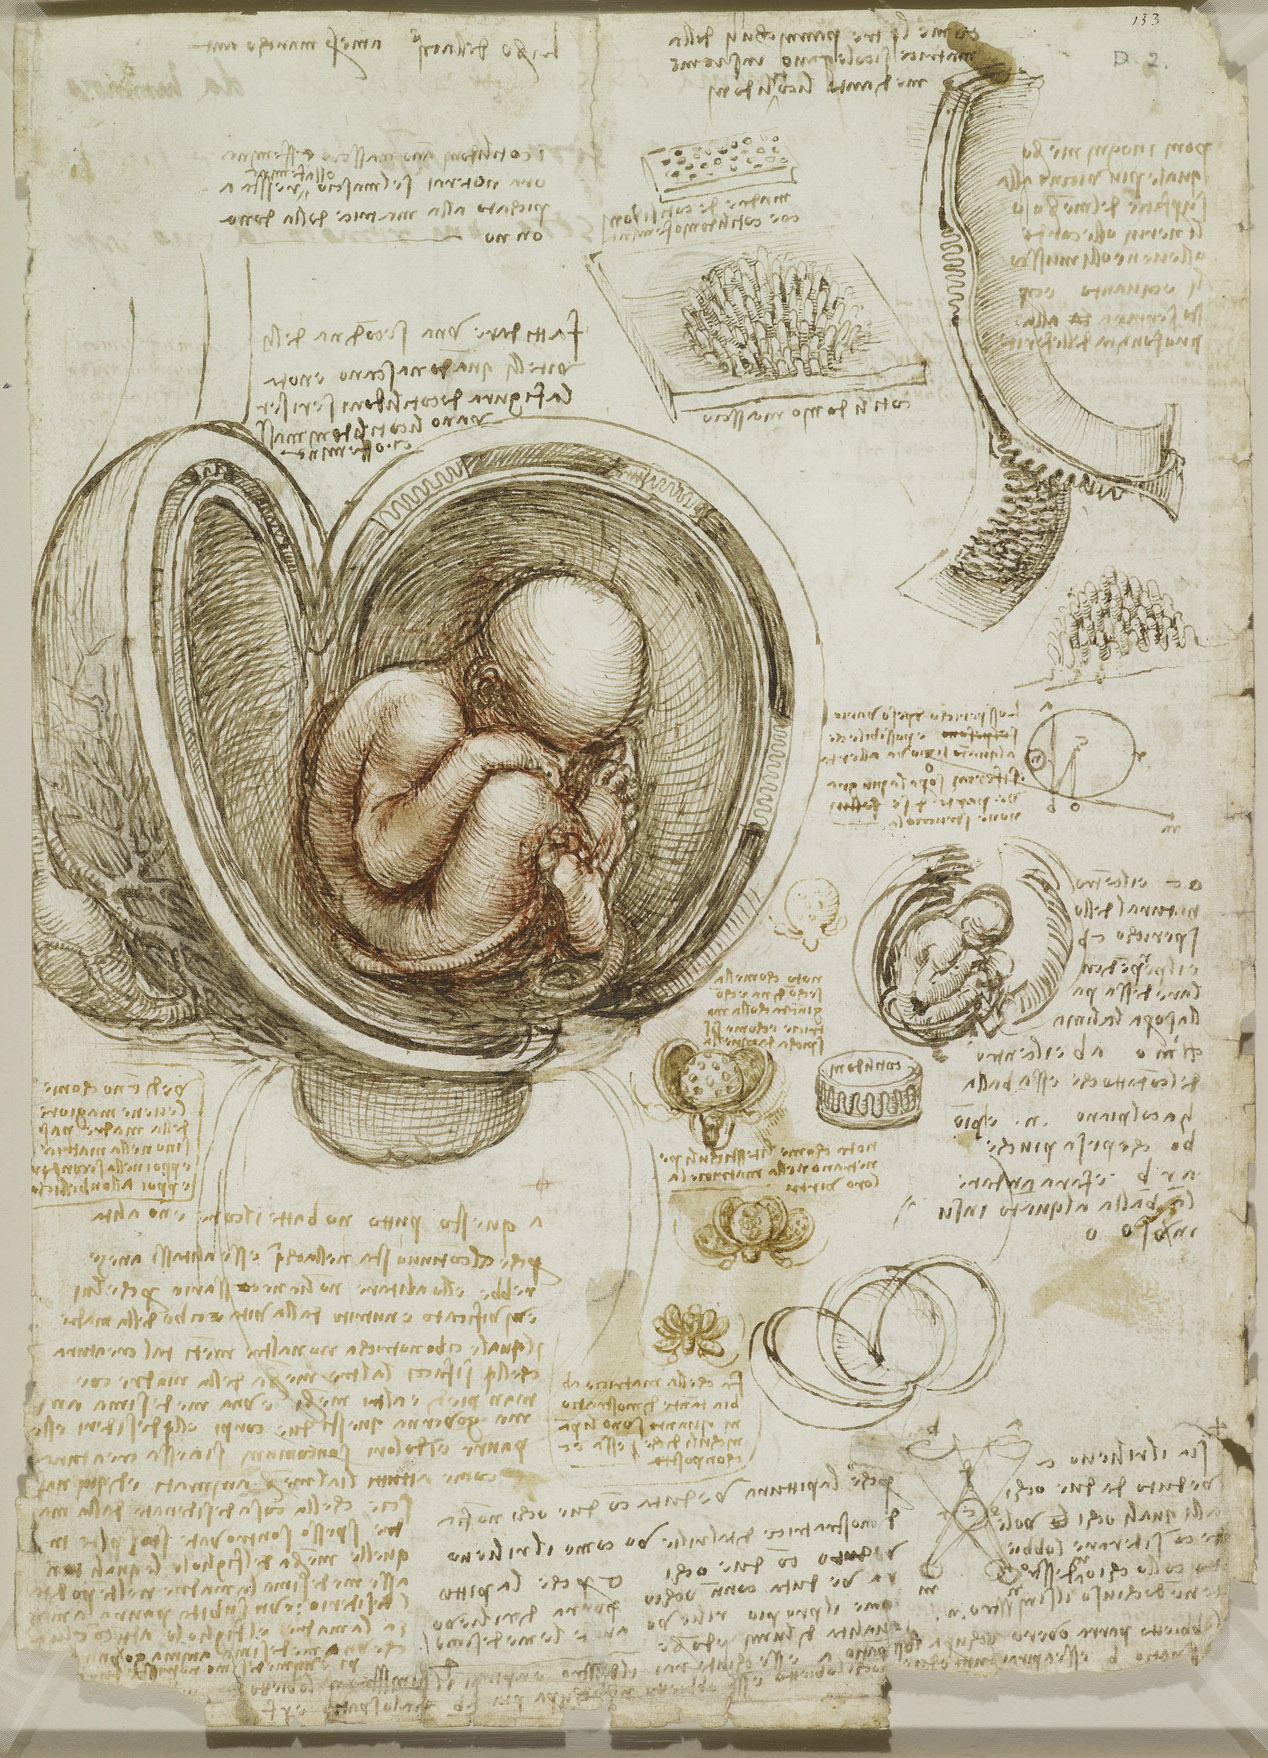 Recto: Studies of the foetus in the womb. Verso: Notes on reprod